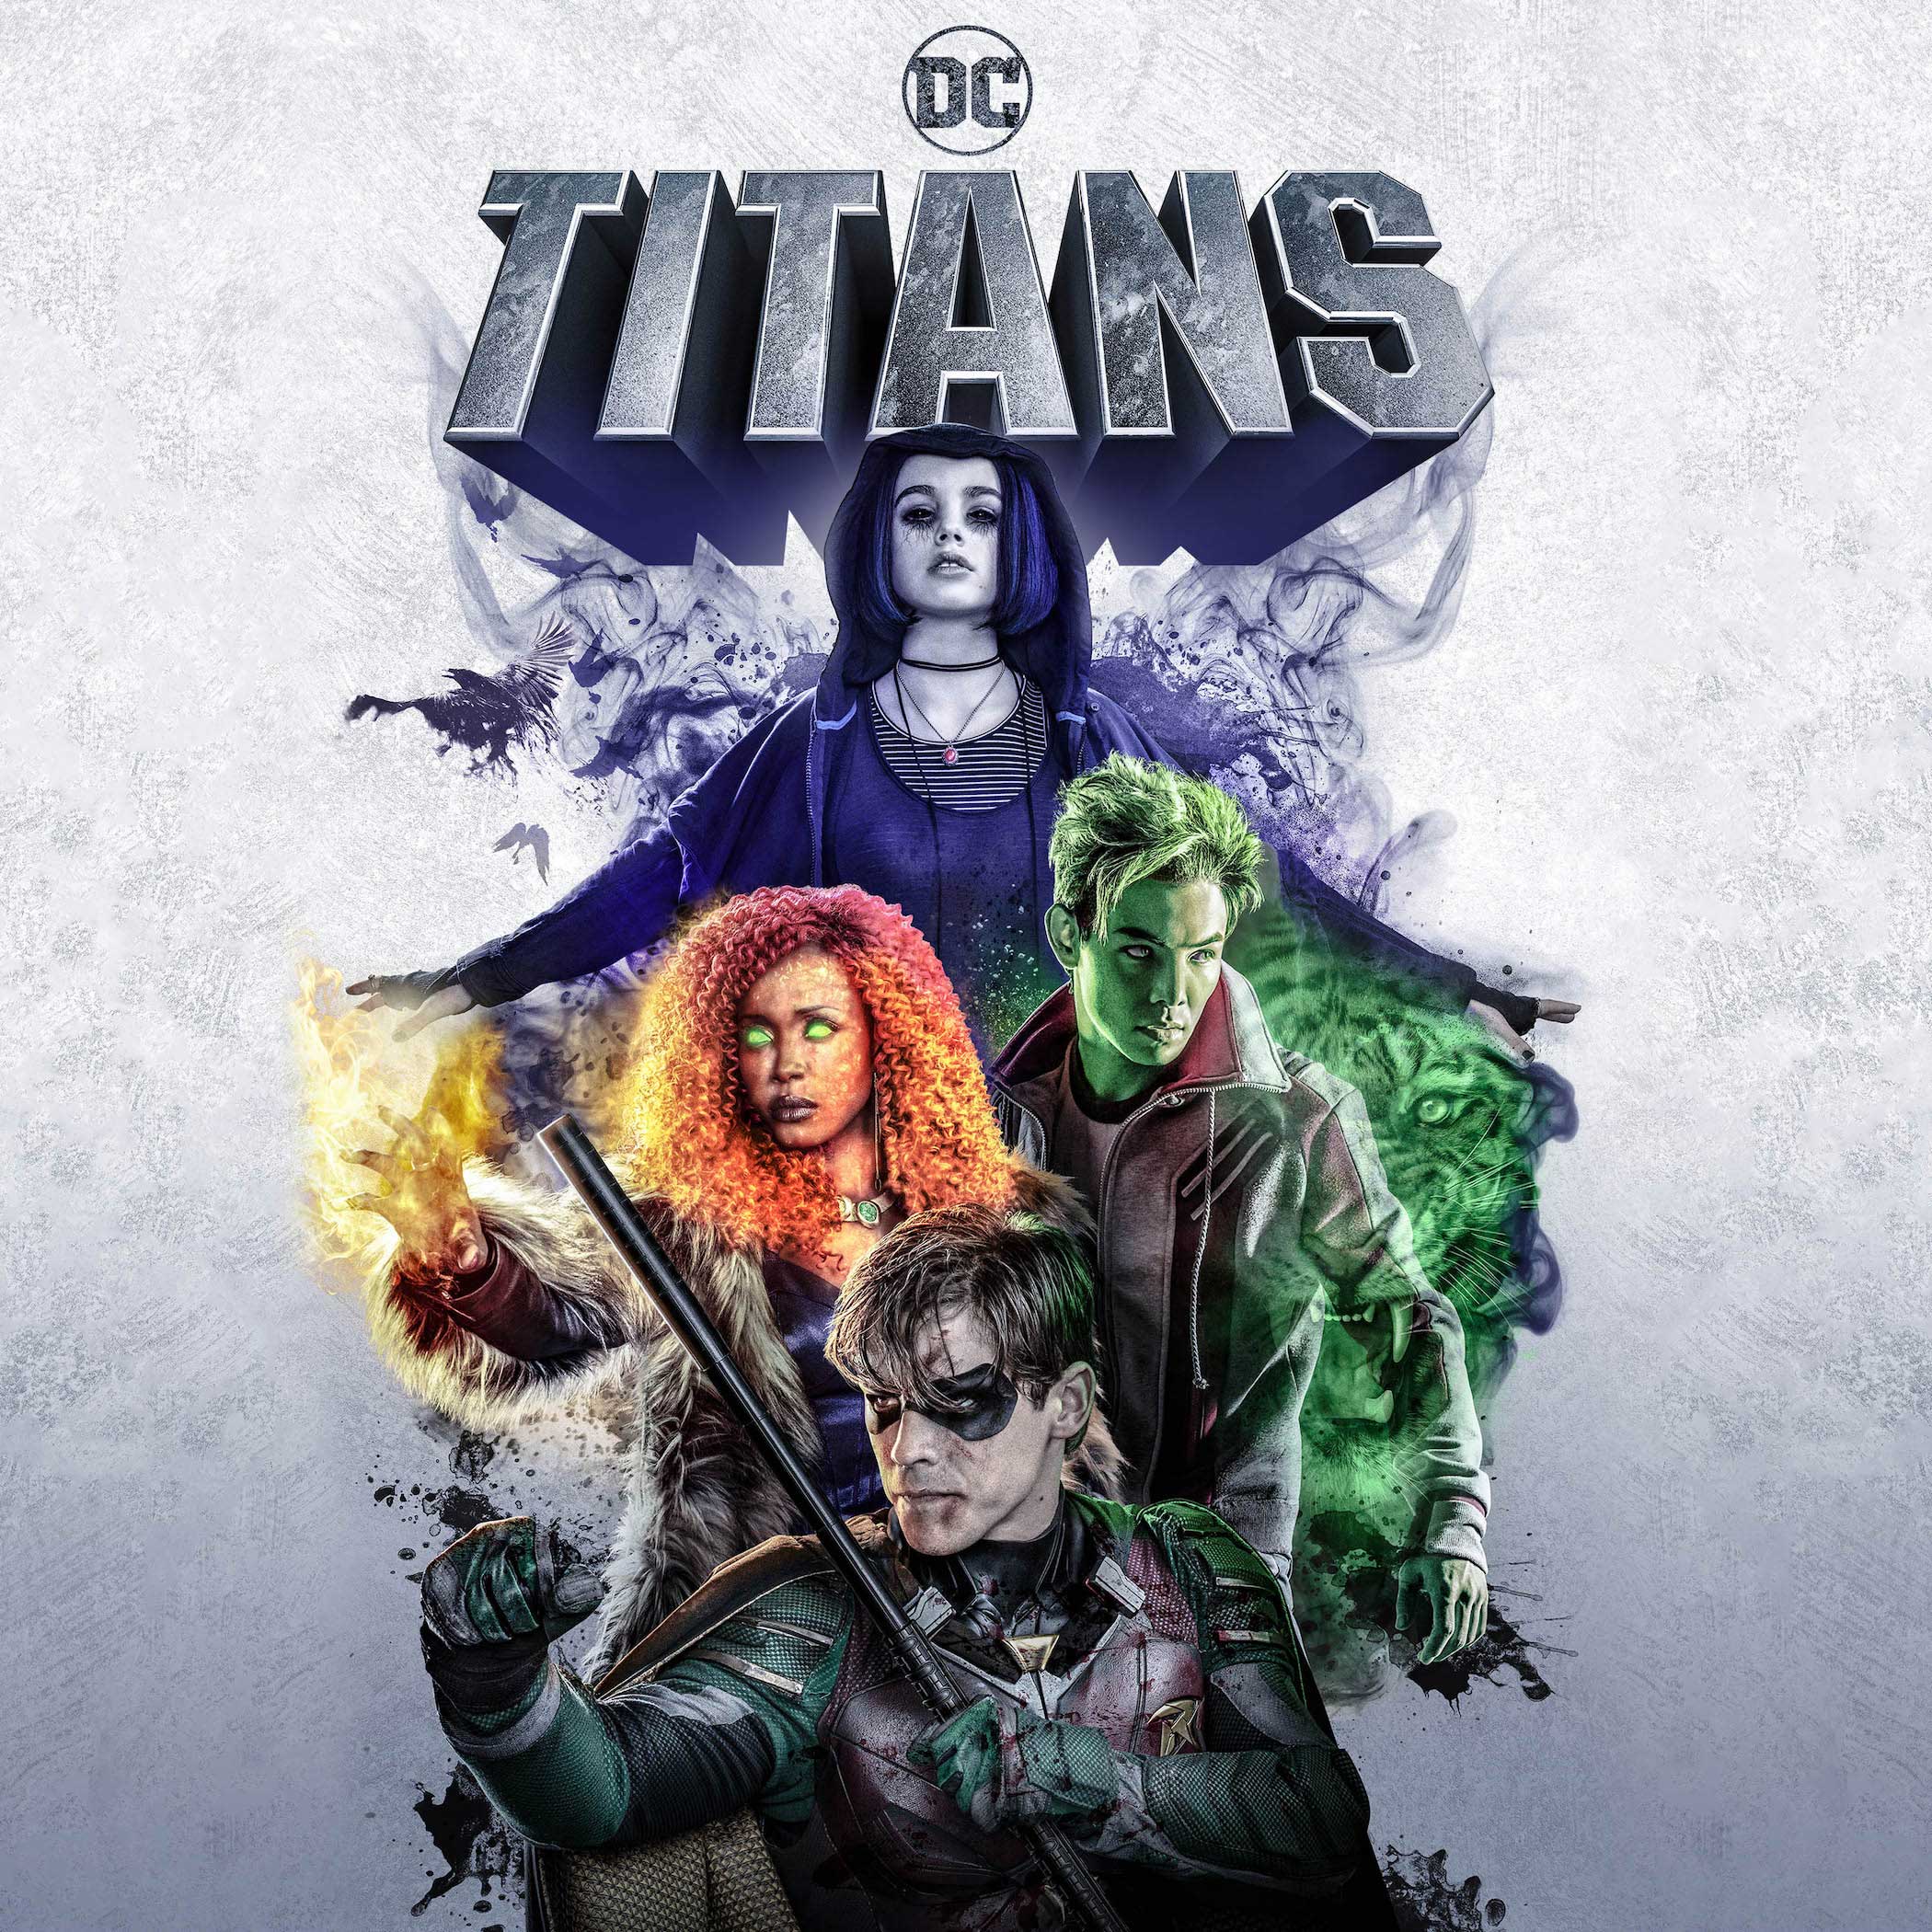 DC's Titans series arrives on digital and Bluray on March 21s — Major